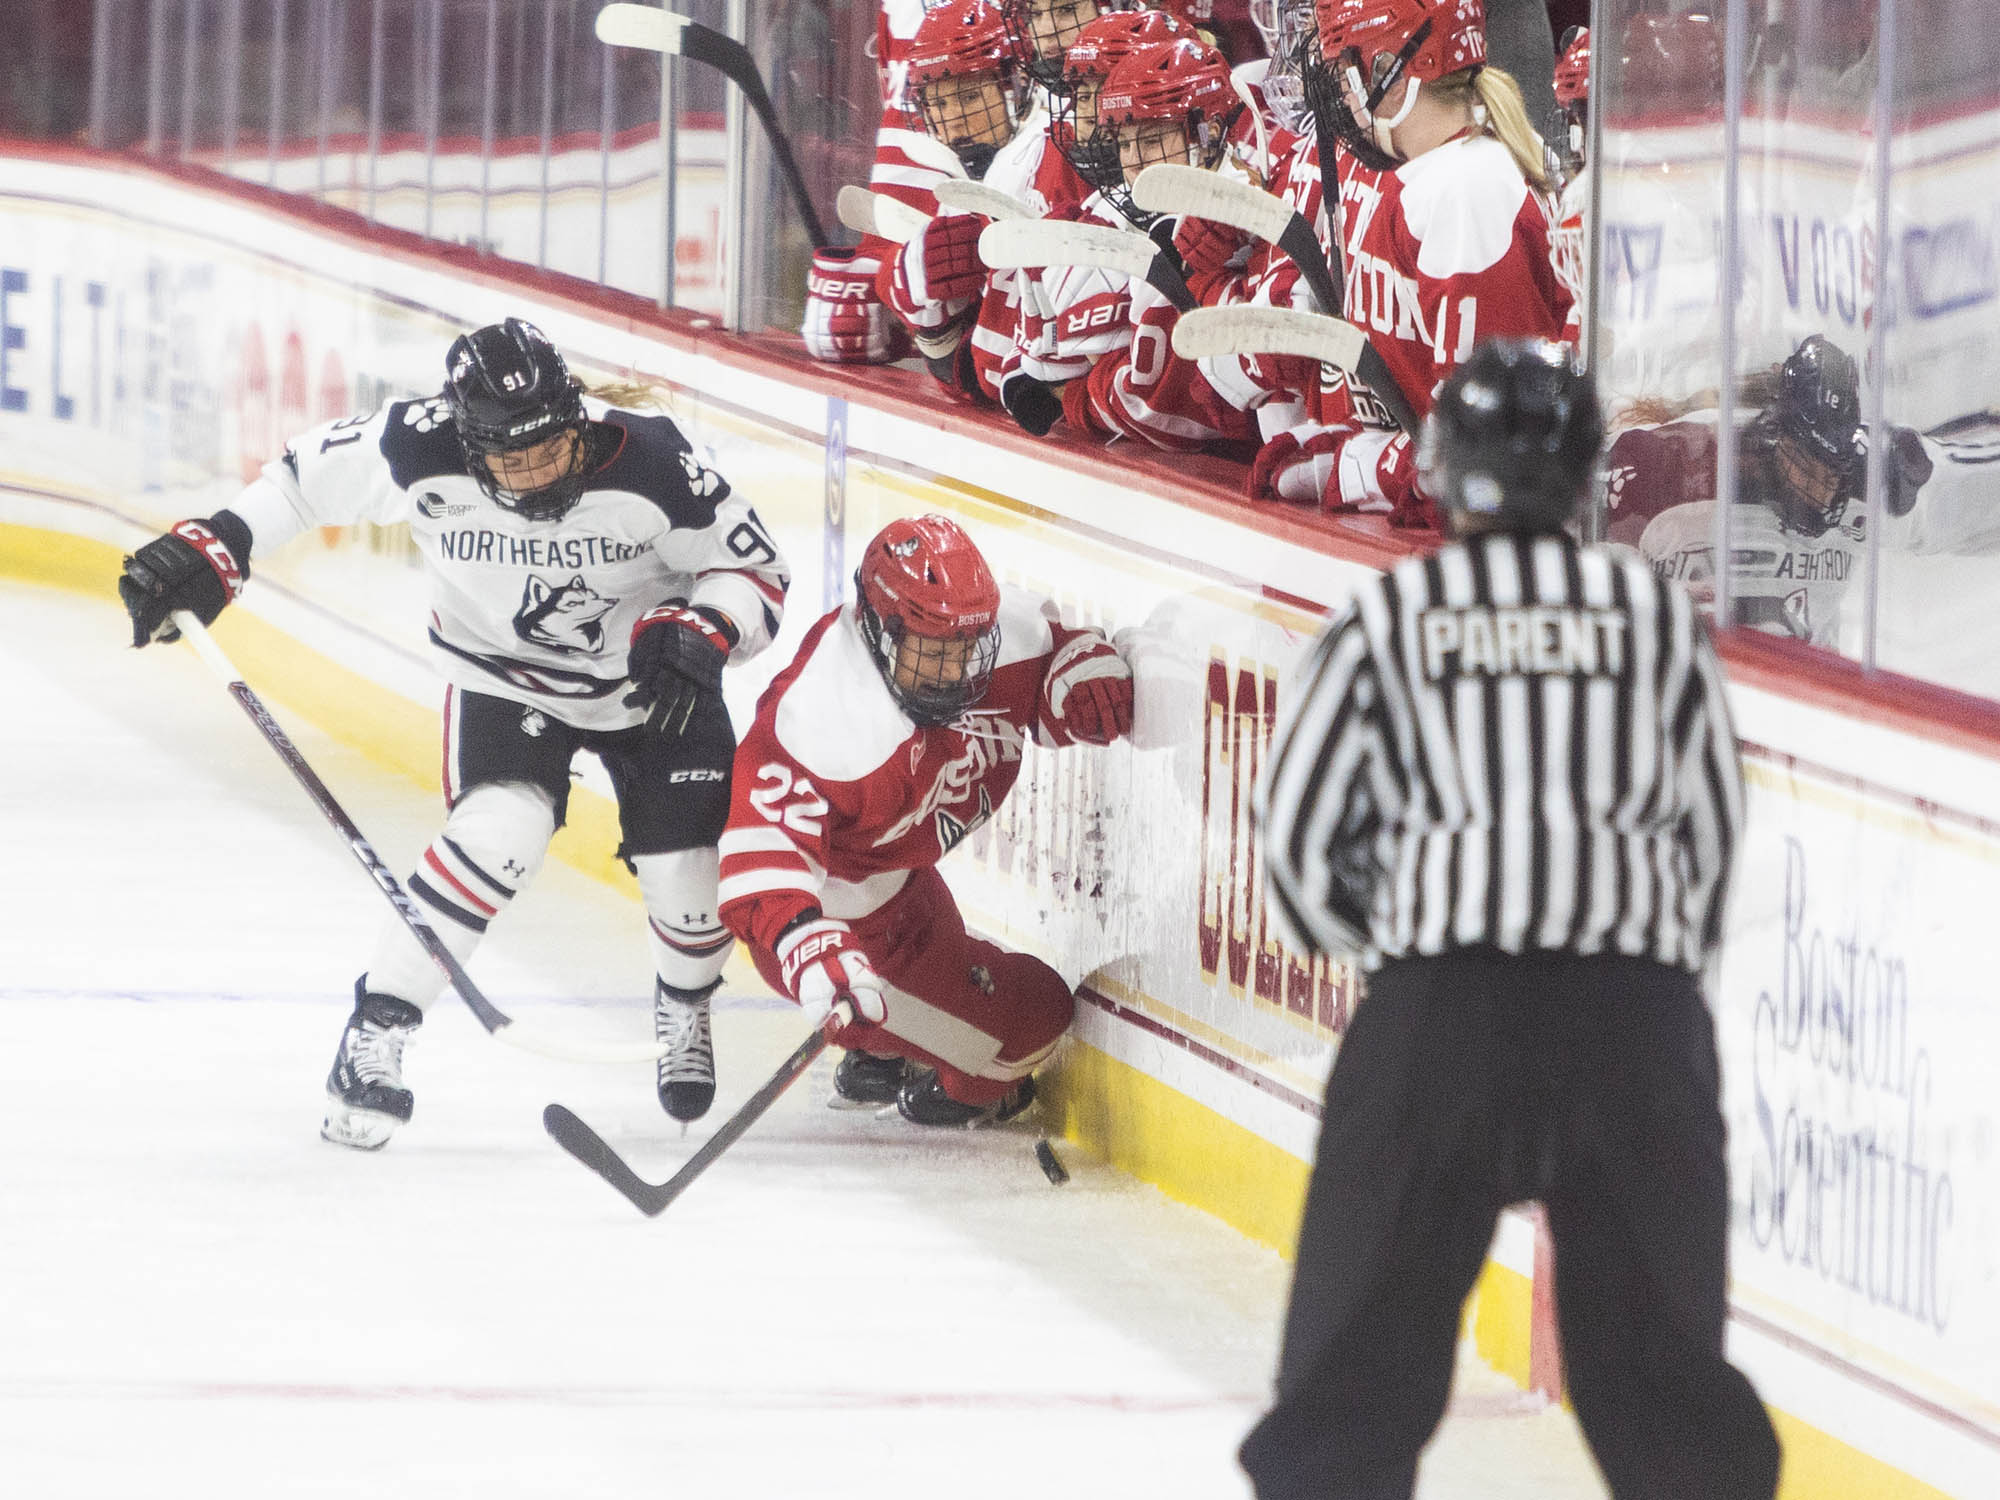 Photo: A NE hockey player in a white and navy uniform checks a BU hockey player against the wall. Behind the wall are the BU hockey team that are currently not on the ice. The BU hockey player is in an all red uniform with white detailing. The referee is in the foreground, bottom right-hand corner of the photo. 